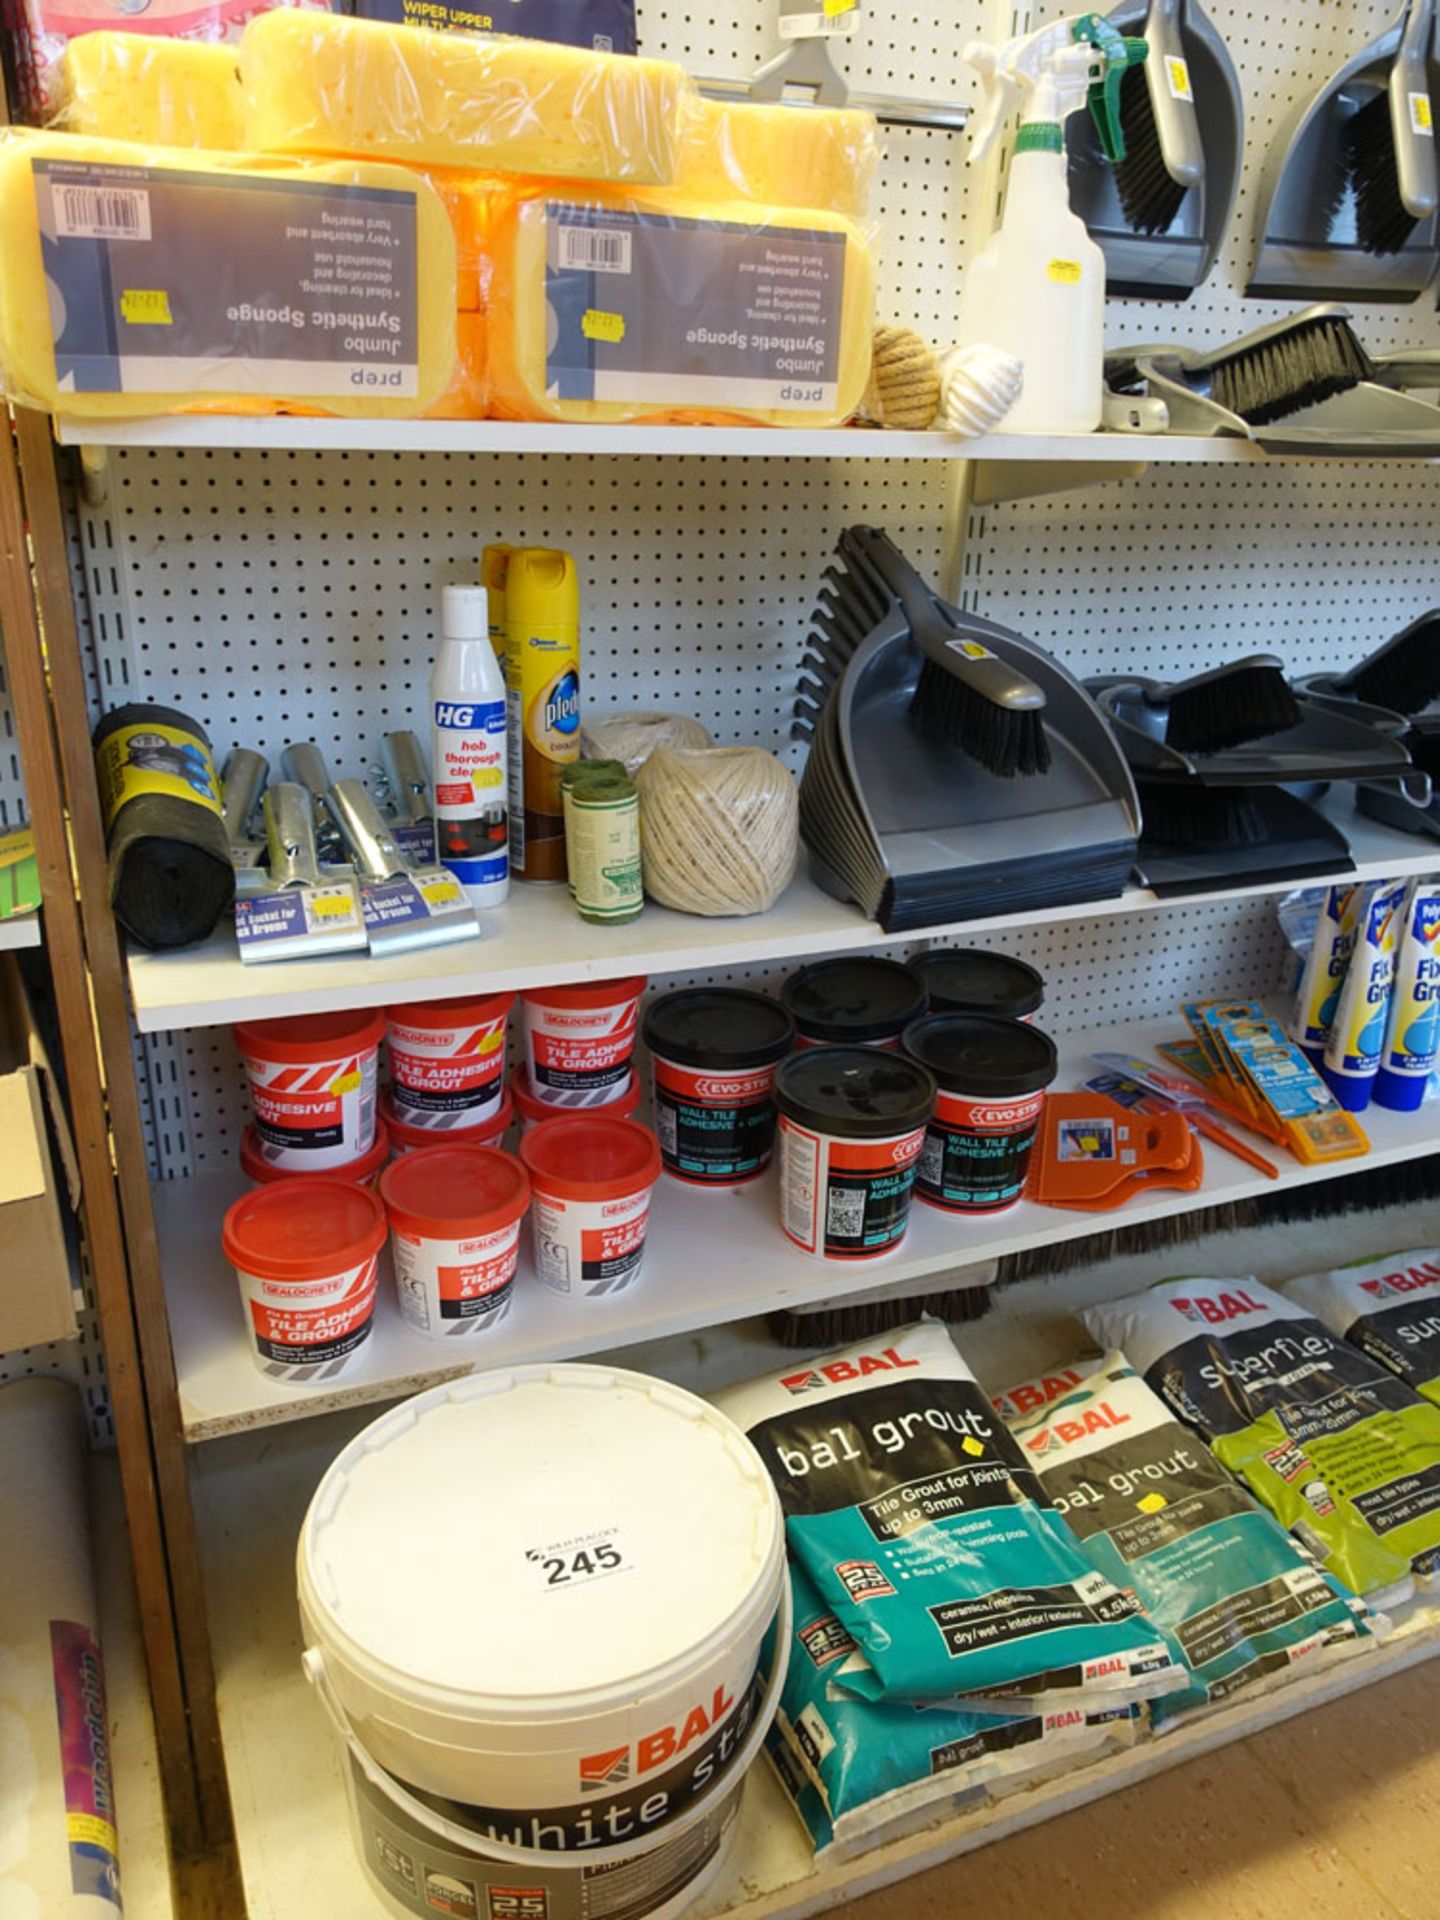 2 shelves containing tile grout and adhesive, etc